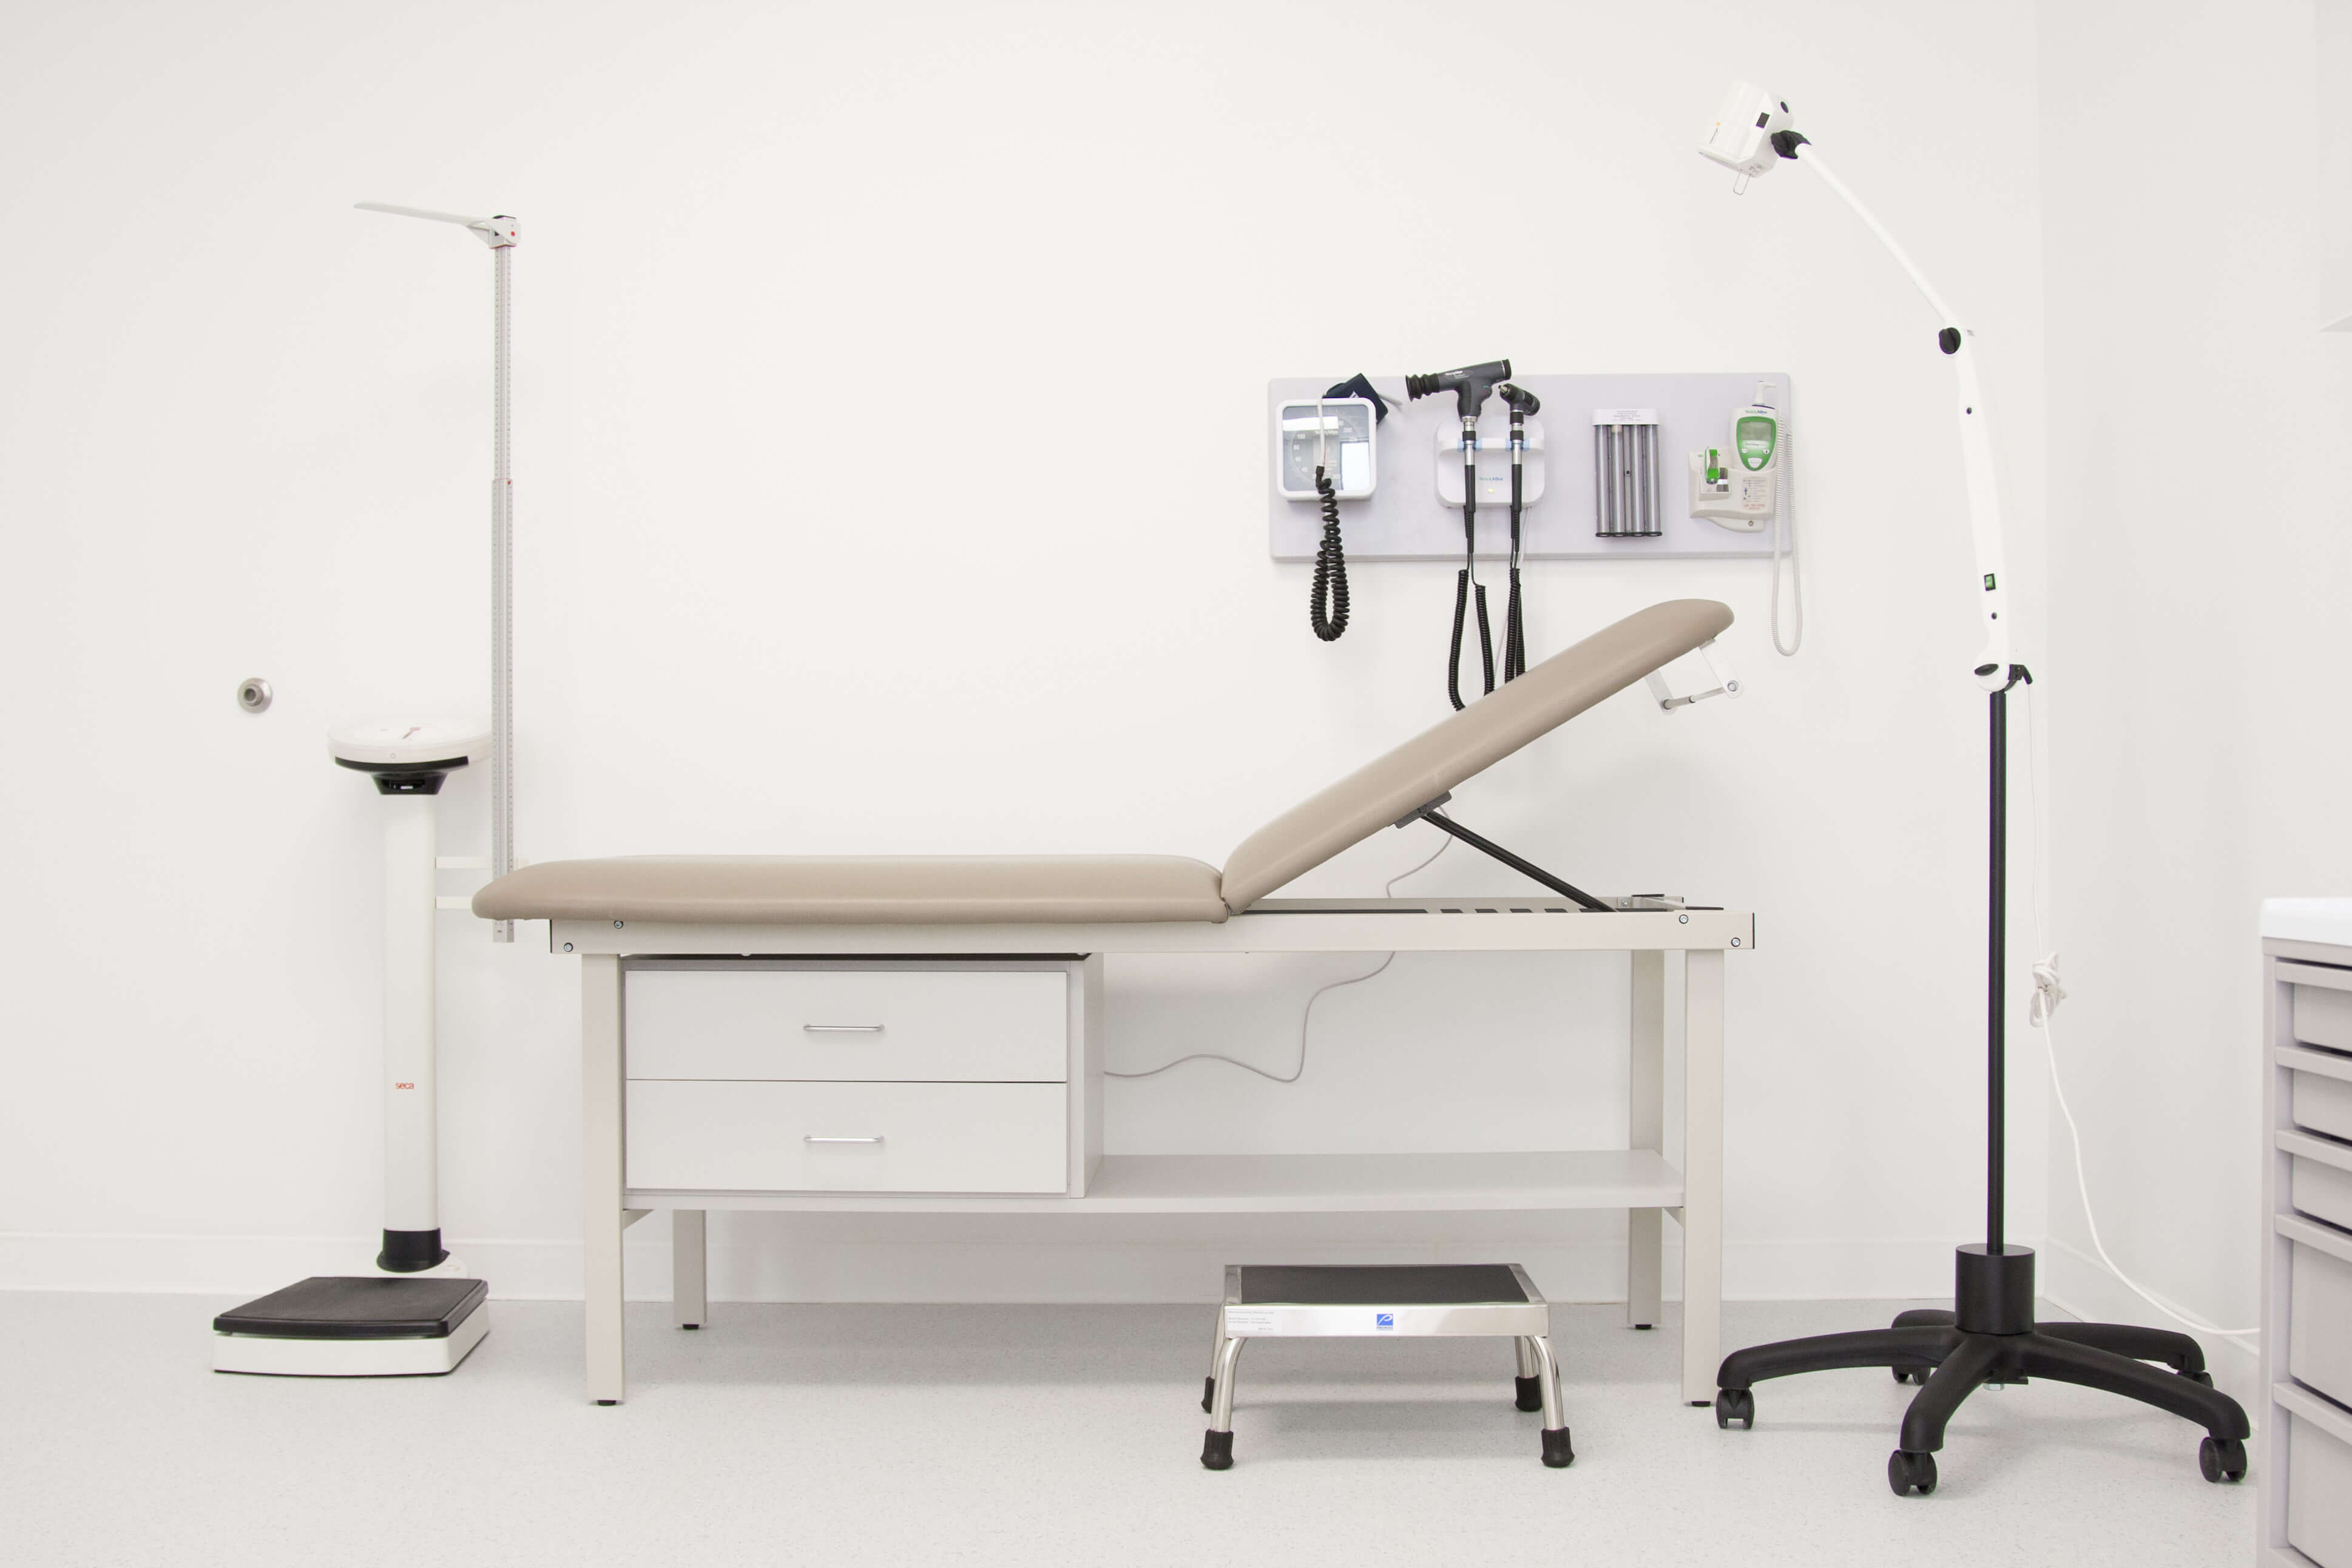 Doctor's office examination room with examination table and basic medical equipment.